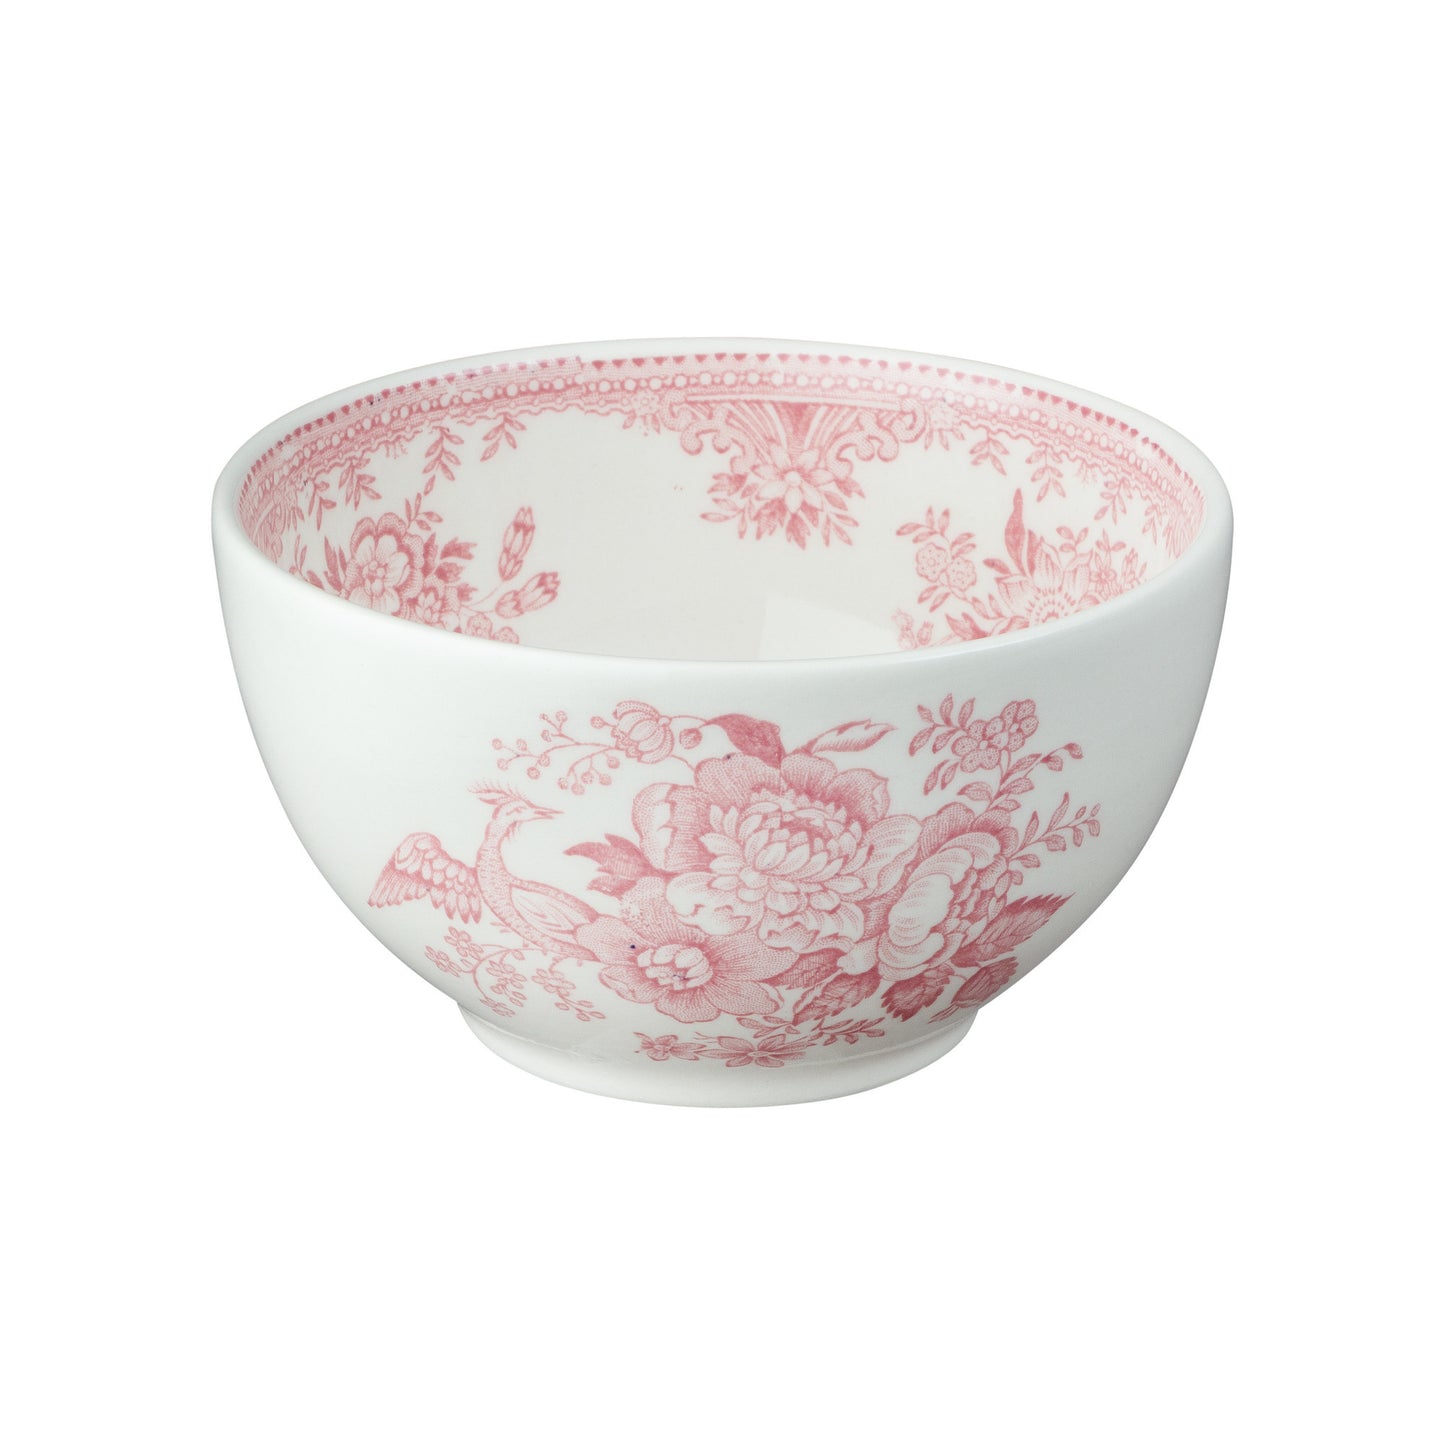 Pink Asiatic Pheasants Mini Footed Bowl 12cm/5" Seconds